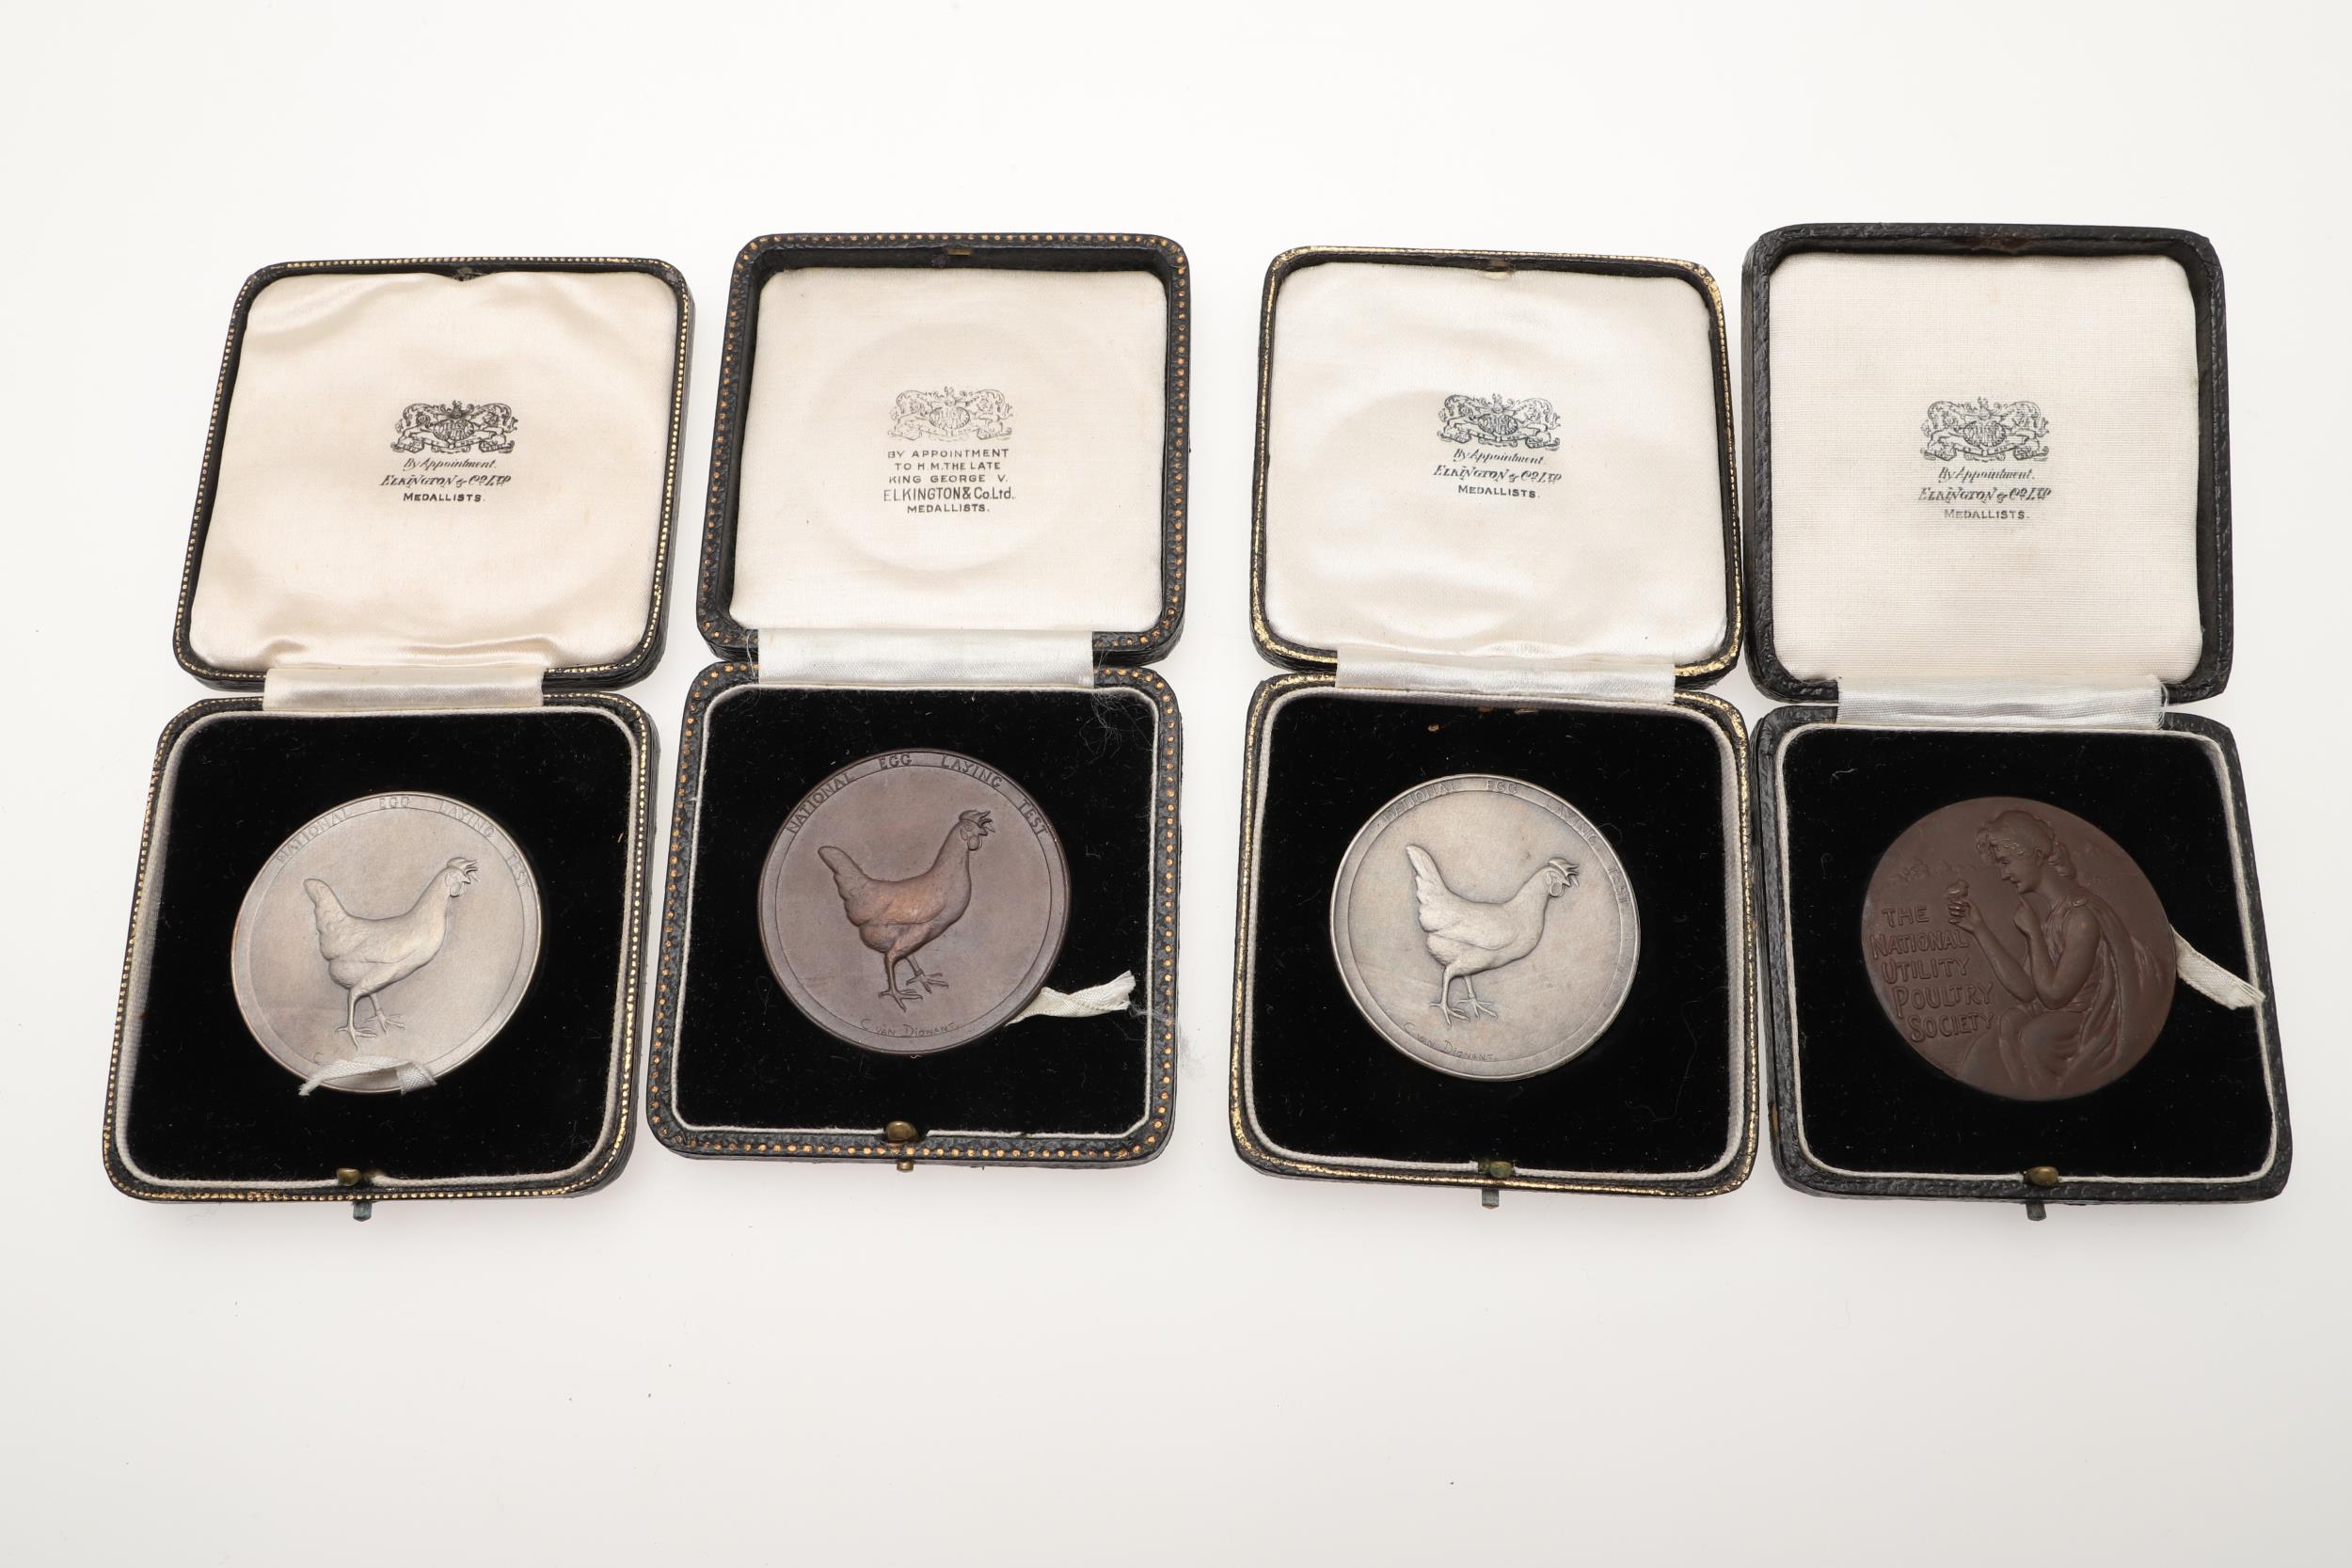 AN EXTENSIVE COLLECTION OF GOLD, SILVER AND BRONZE MEDALS FOR EGG LAYING. - Image 12 of 23